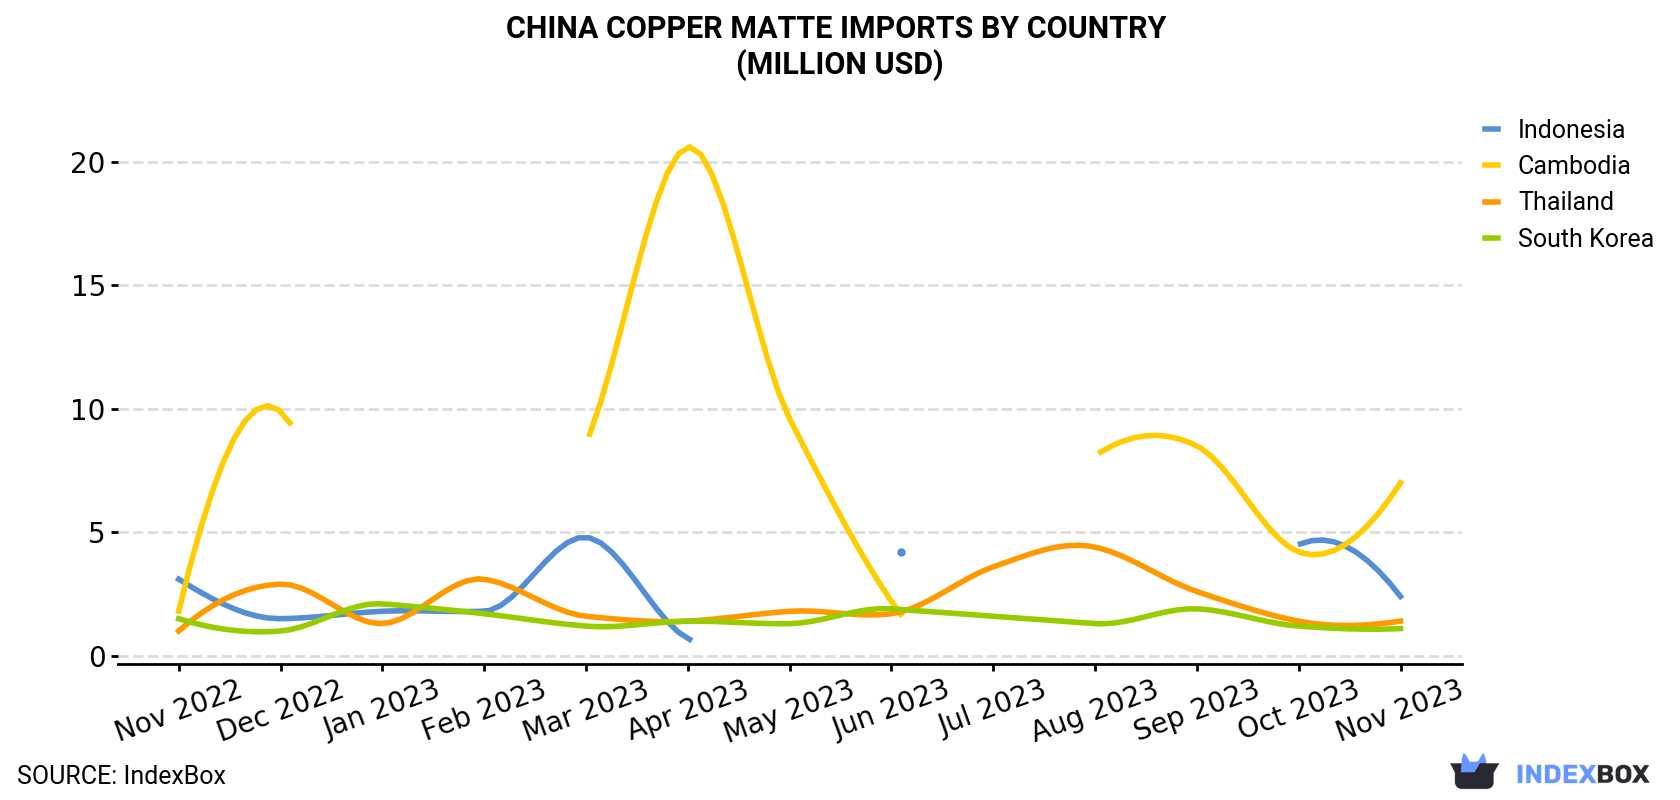 China Copper Matte Imports By Country (Million USD)